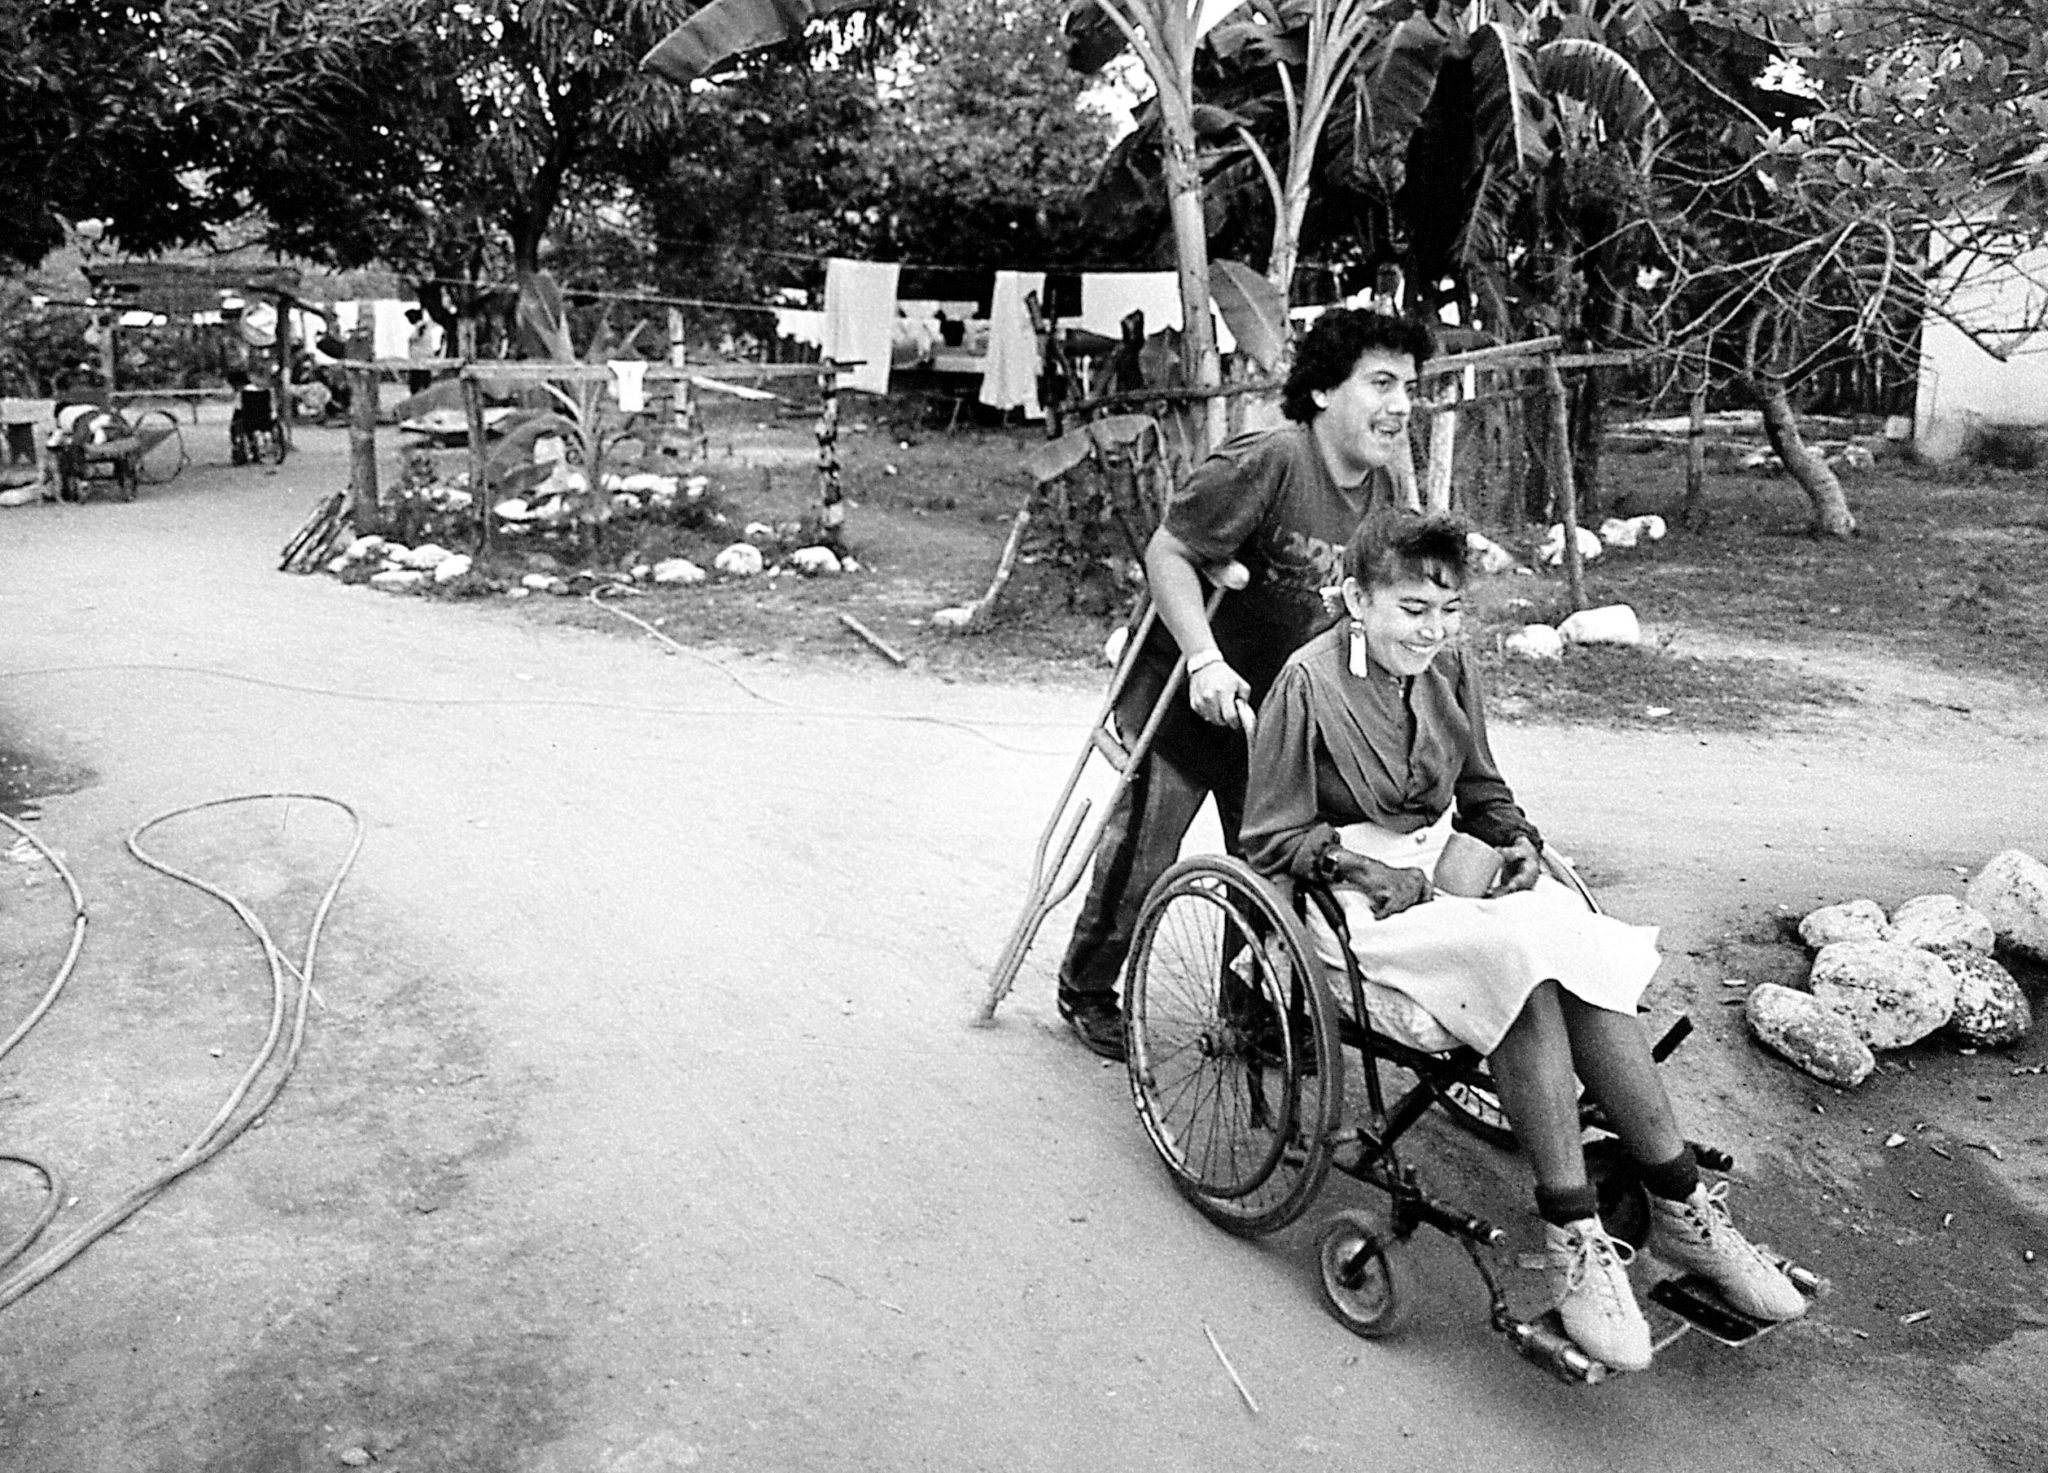 People with disabilities help each other move around the village.